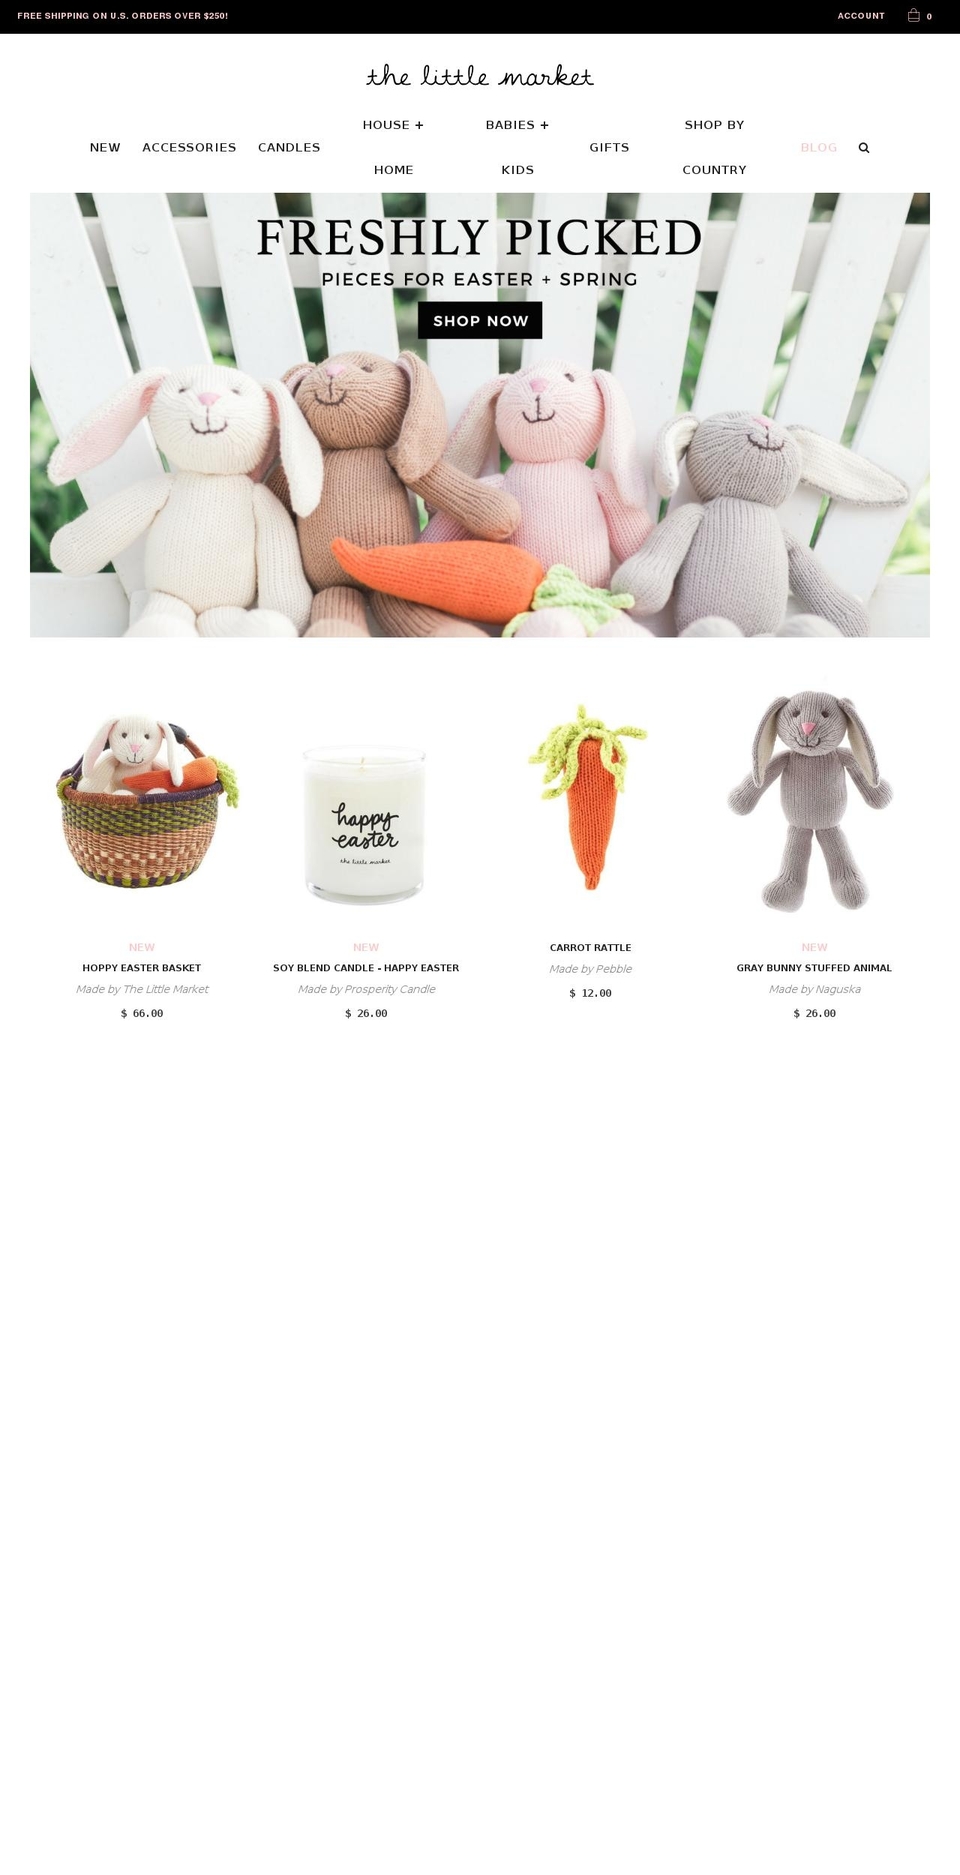 Wholesale Shopify theme site example thelittlemarket.com